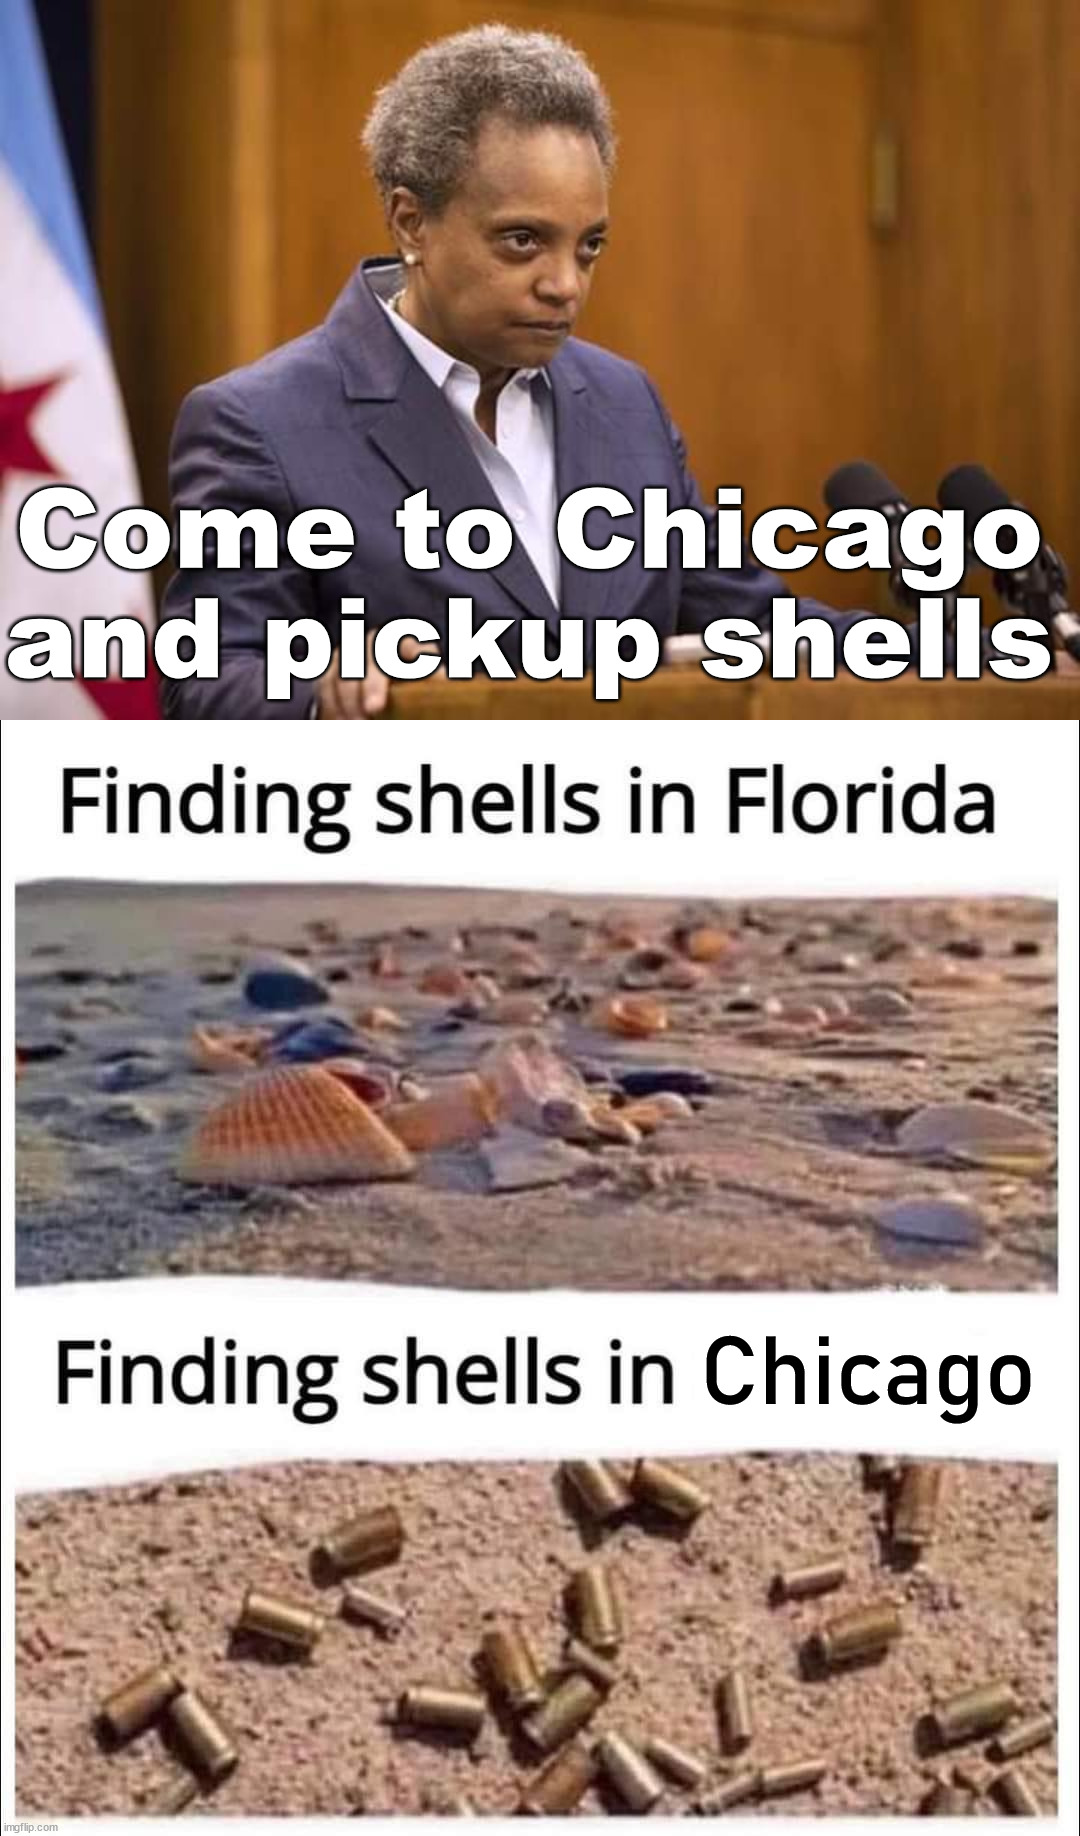 The shells are beautiful this tme of the year | Come to Chicago and pickup shells; Chicago | image tagged in mayor chicago,political meme,shell | made w/ Imgflip meme maker